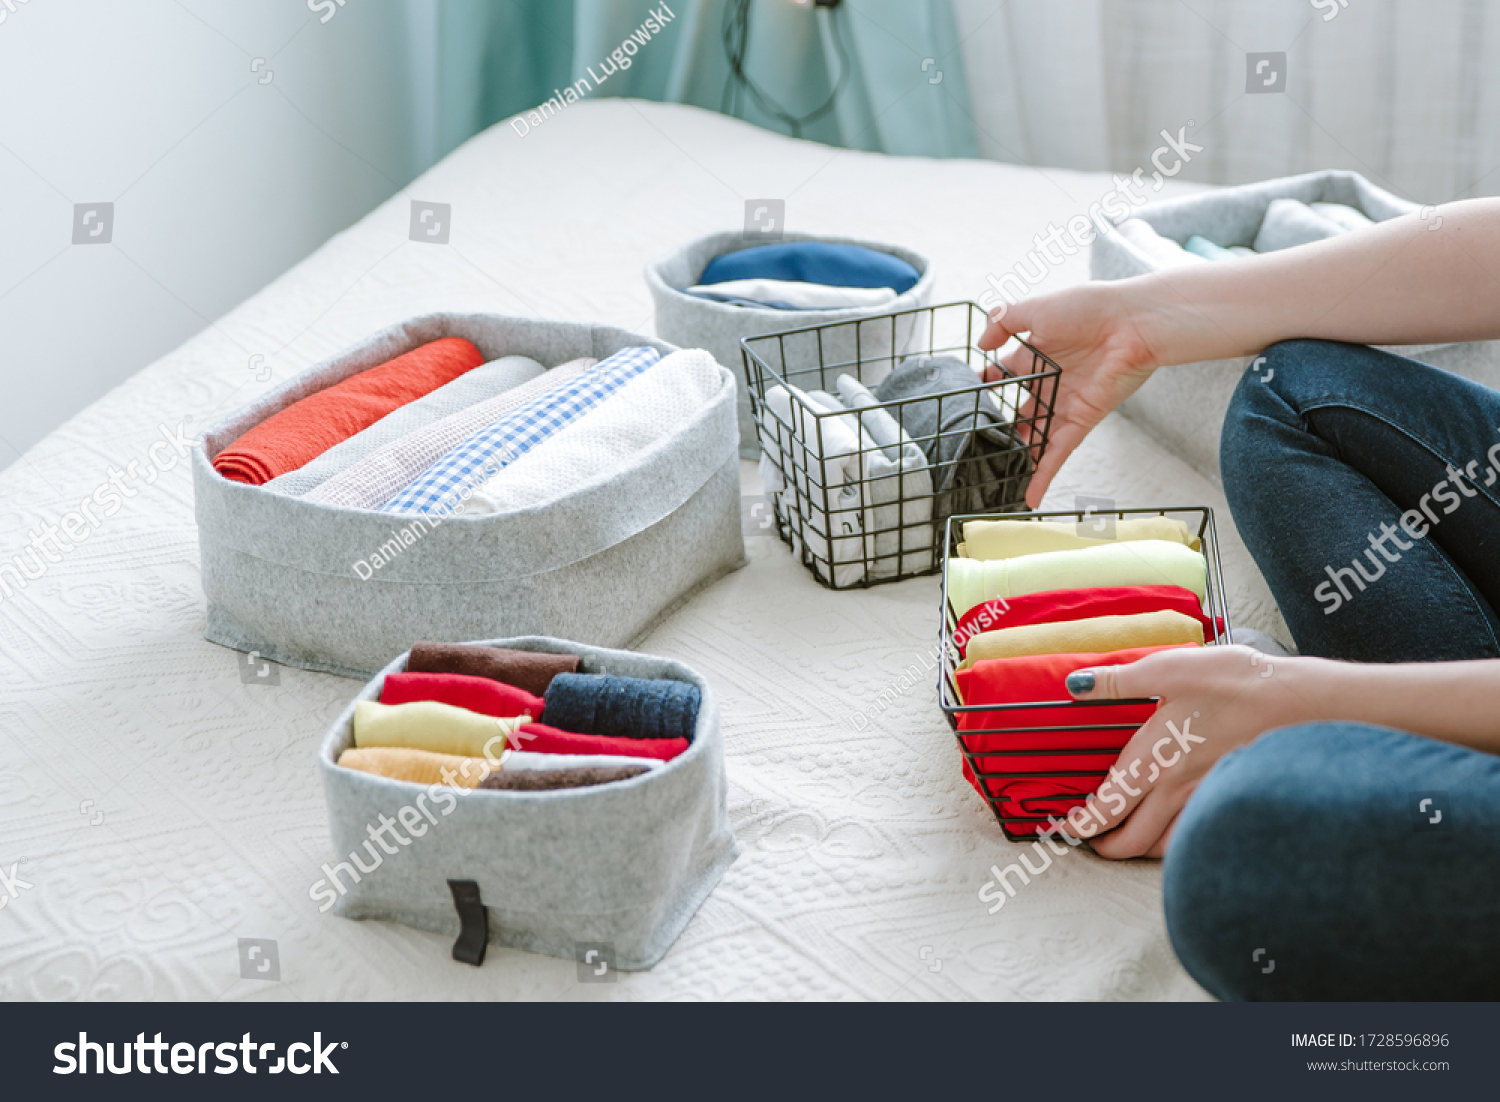 Folding clothes and organizing stuff in boxes and baskets. Concept of tidiness, minimalism lifestyle and japanese t-shirt folding system. Minimalist storage system and wardrobe #1728596896